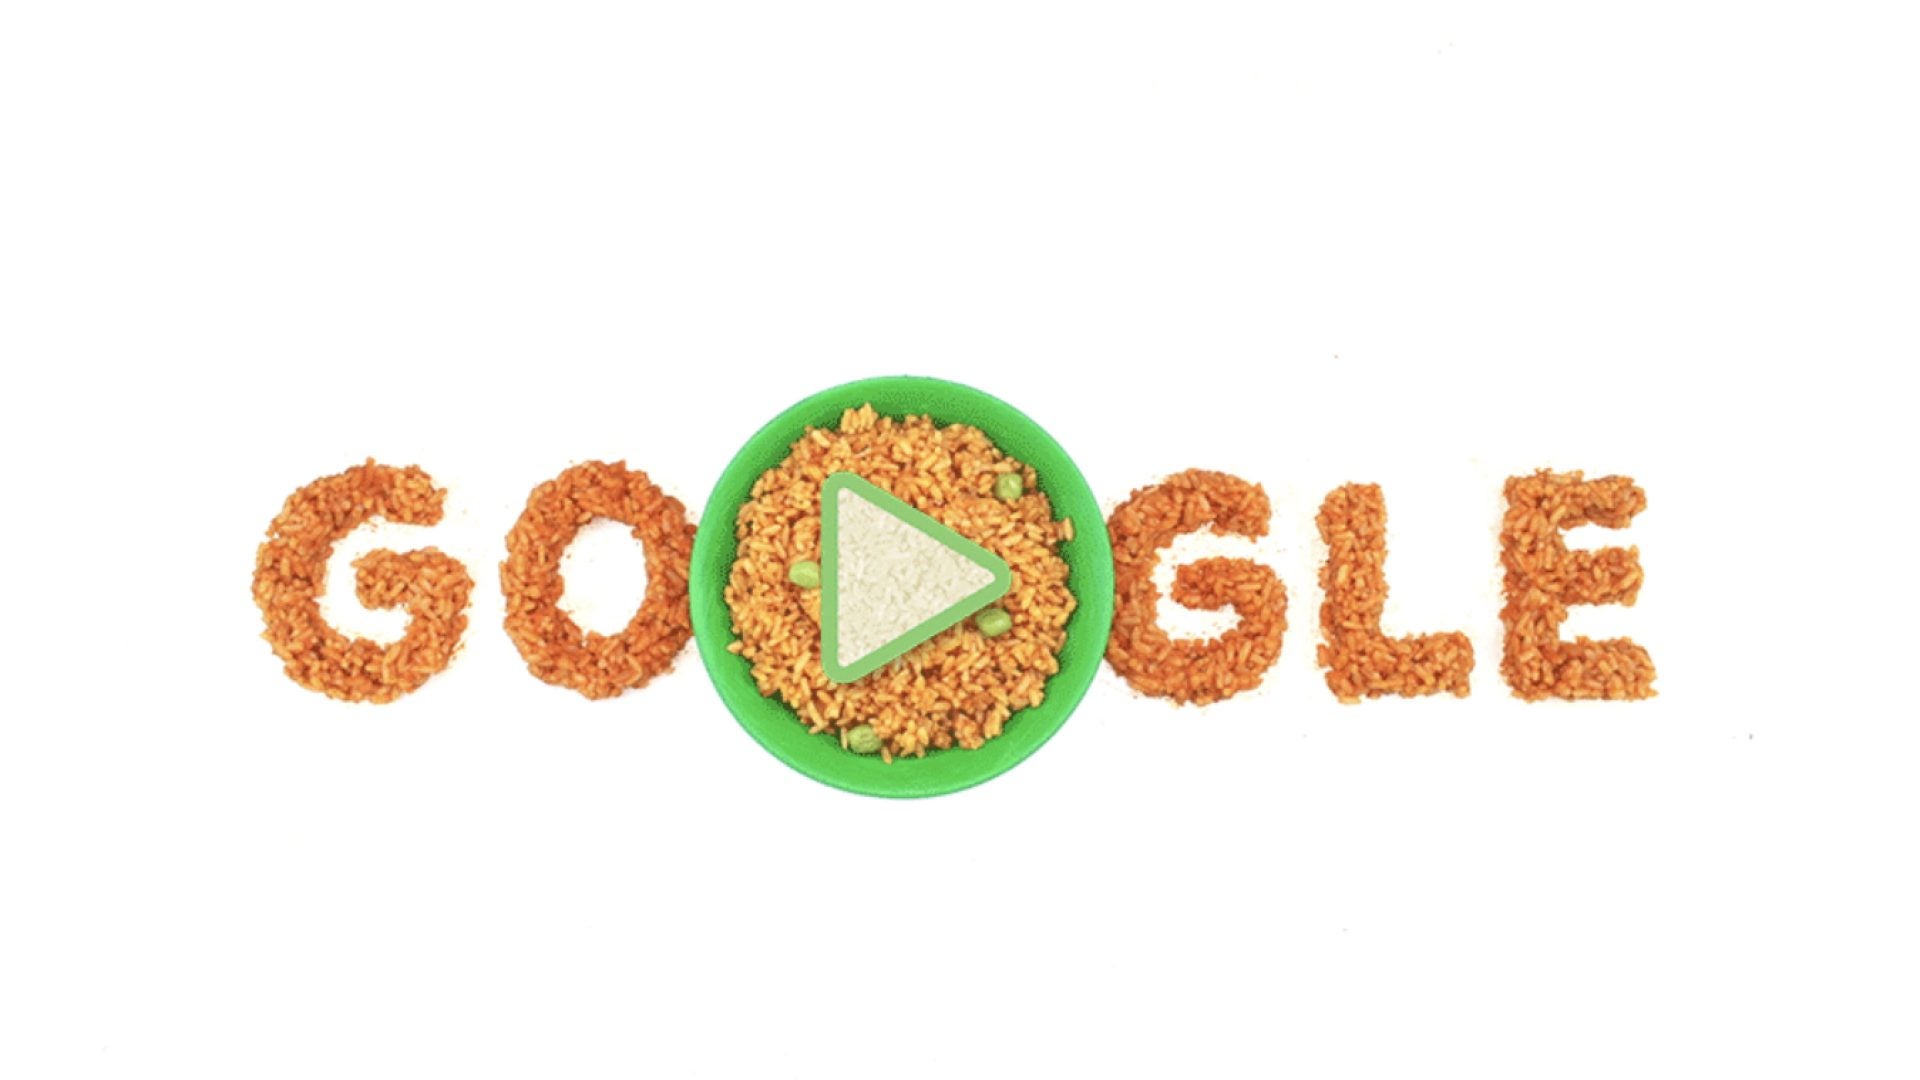 Which West African Cousin Is Responsible For The Jollof Rice Google Doodle?